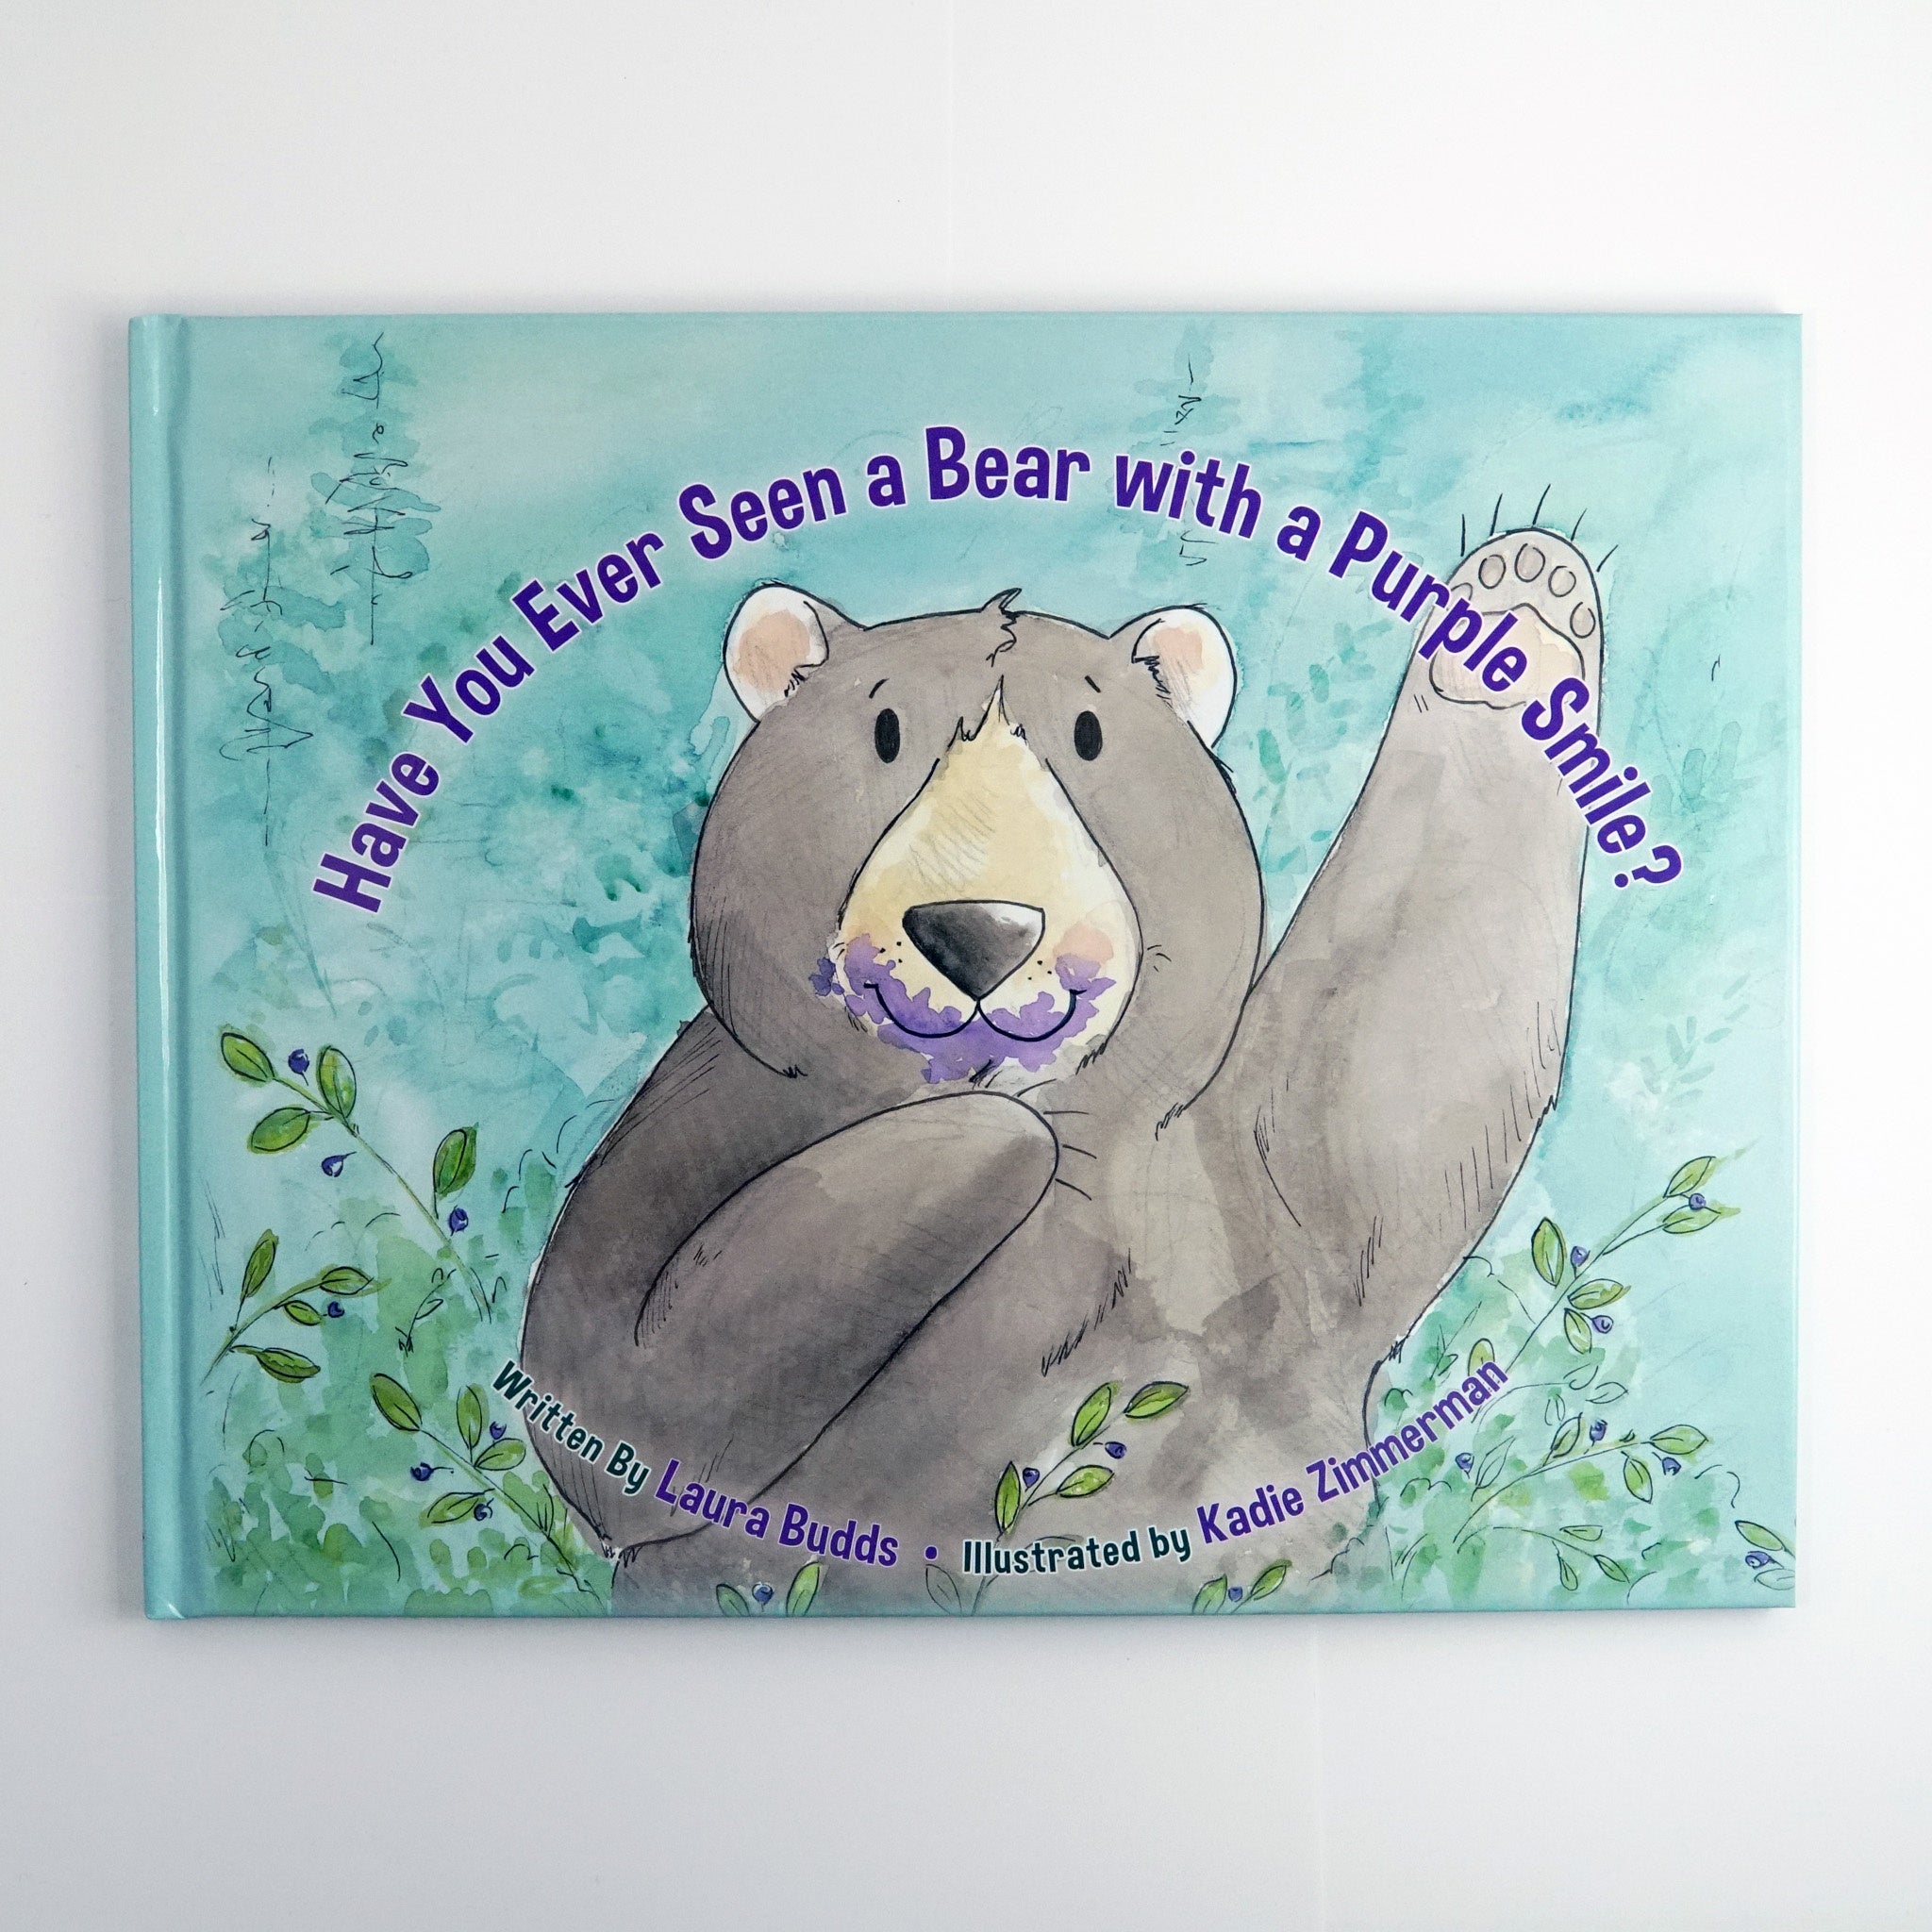 BK 20 HAVE YOU EVER SEEN A BEAR WITH A PURPLE SMILE BY LAURA BUDDS #21036653 D2 MAR24